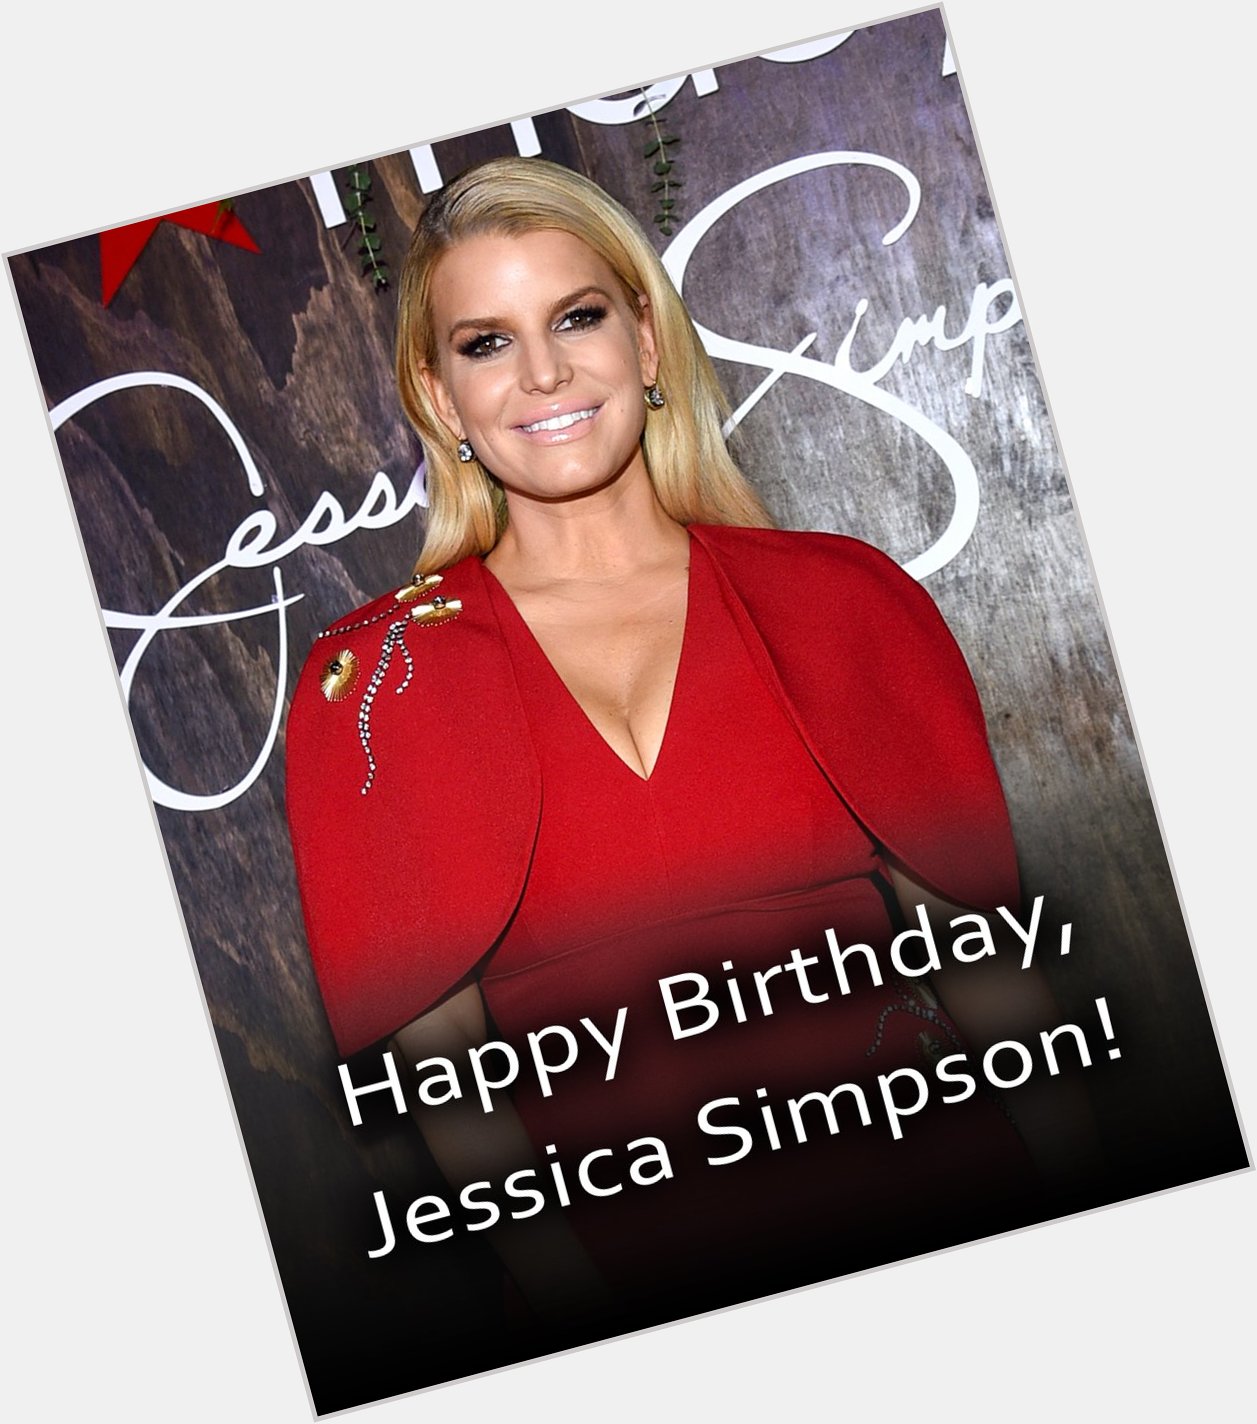 HAPPY BIRTHDAY TO JESSICA SIMPSON! The actress and singer is turning 42 years old today.  